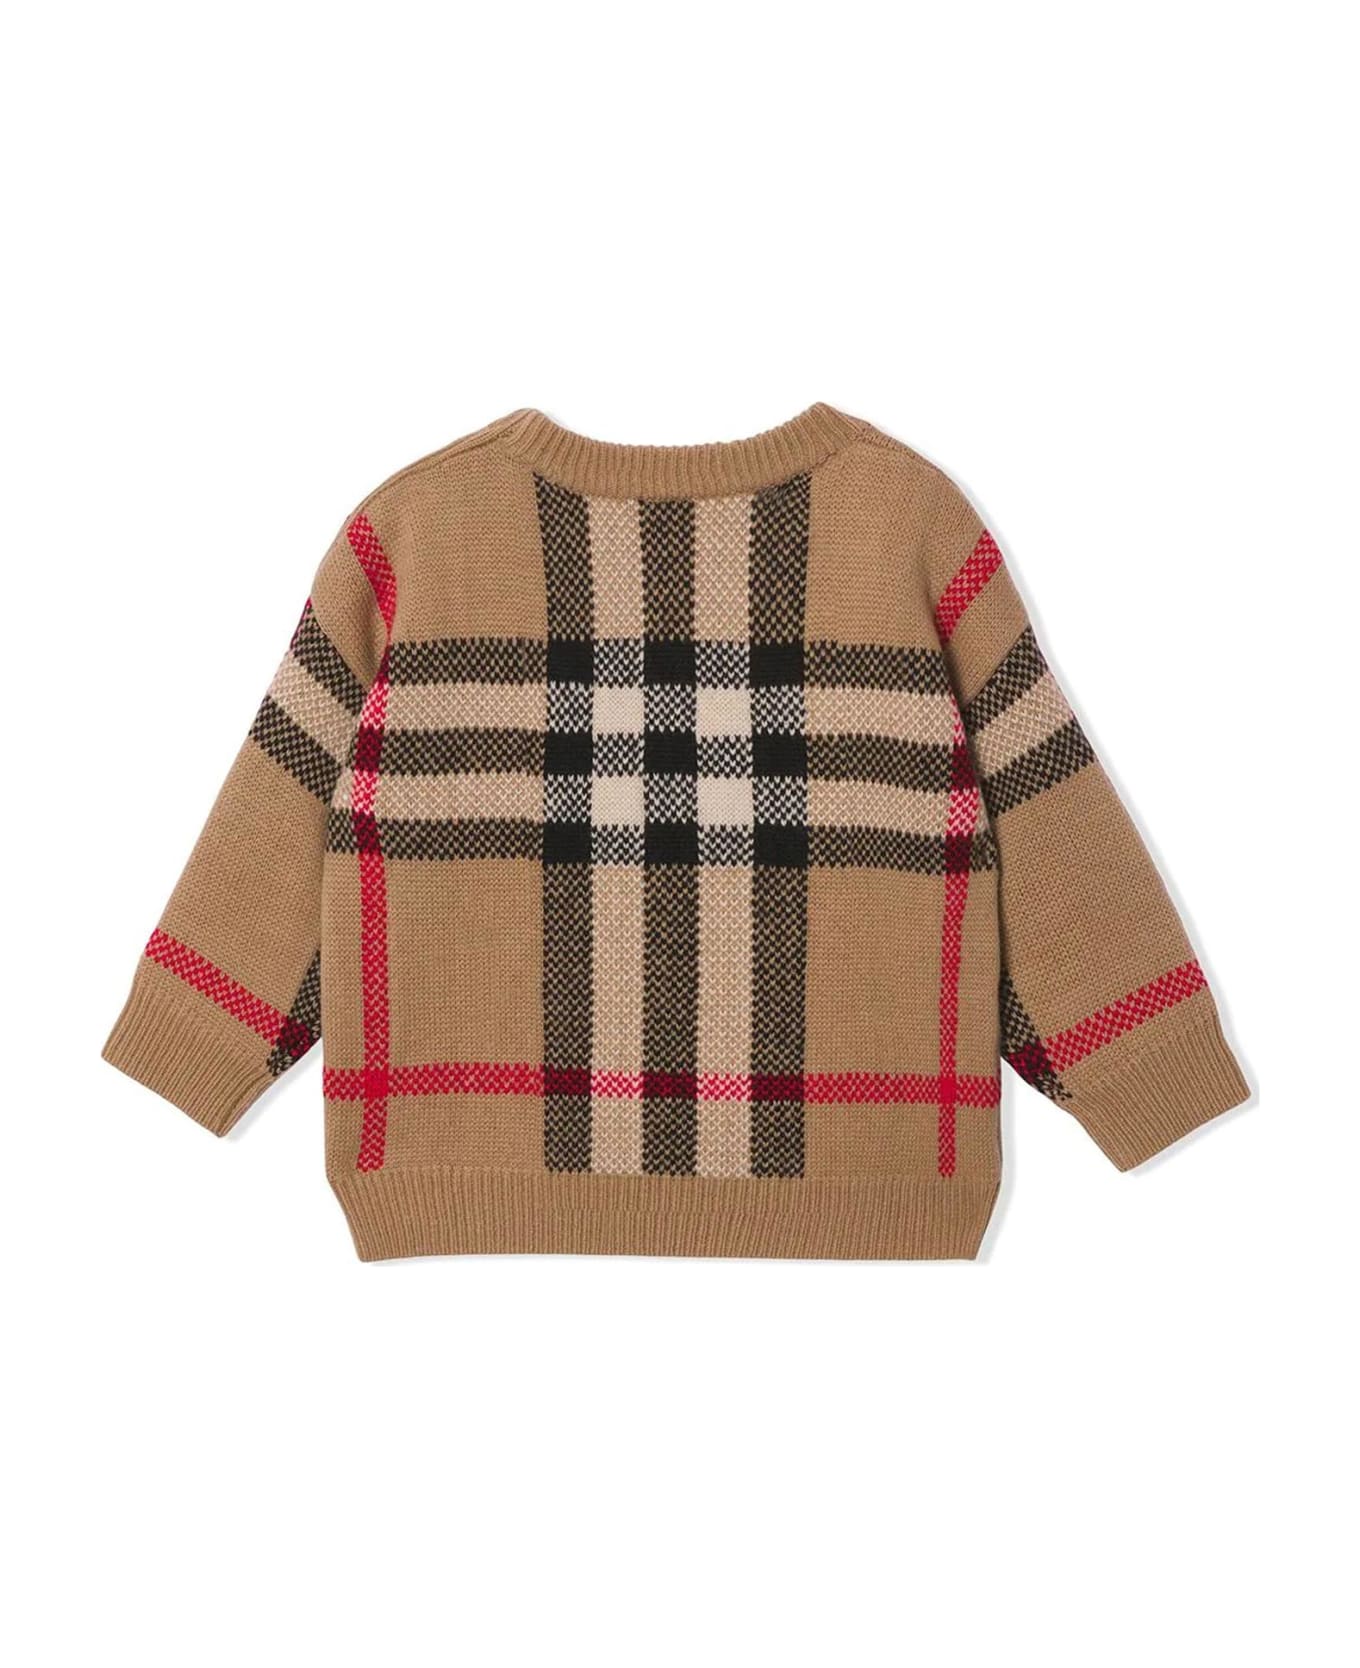 Burberry Sweater With Check Pattern - Beige